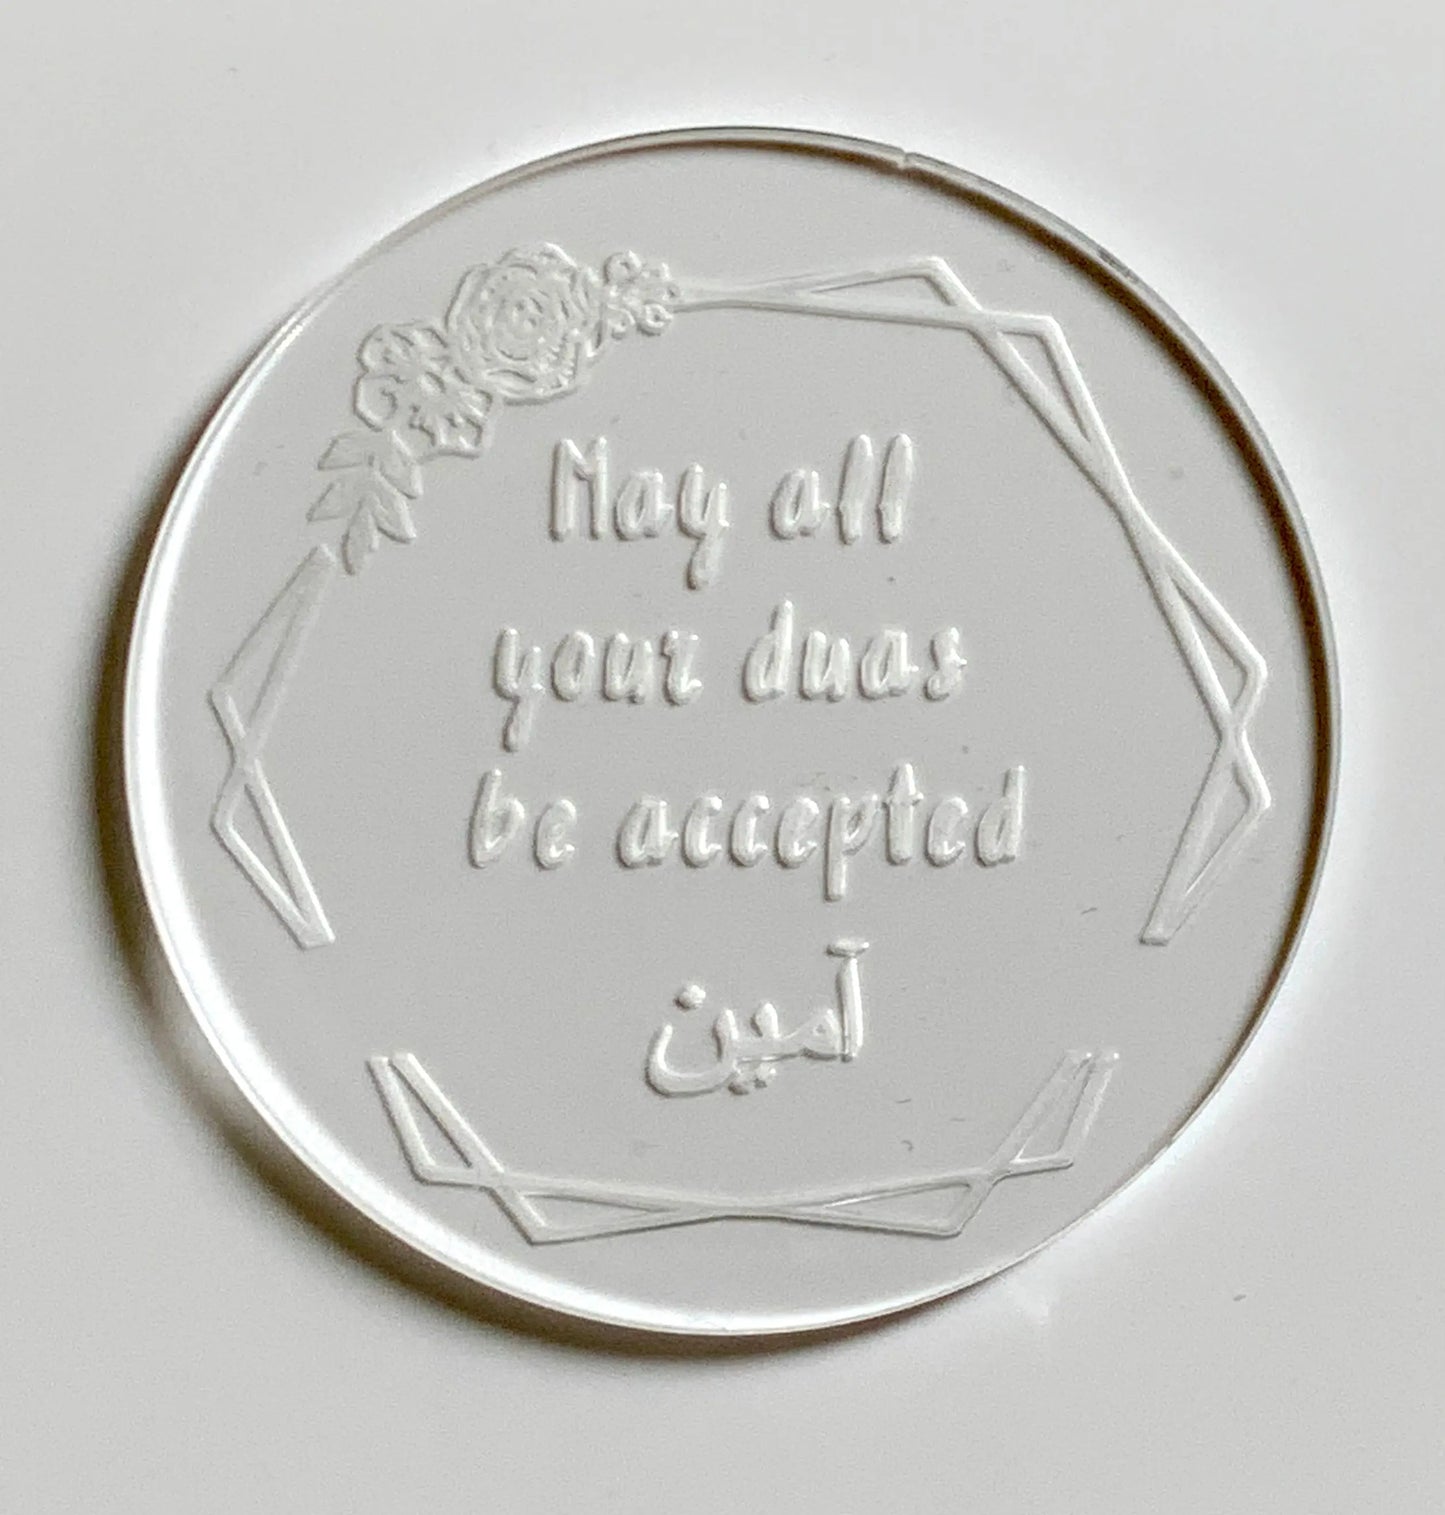 Ramadan / Eid - MAY ALL YOUR DUAS BE ACCEPTED - debossing acrylic stamp MEG cookie cutters